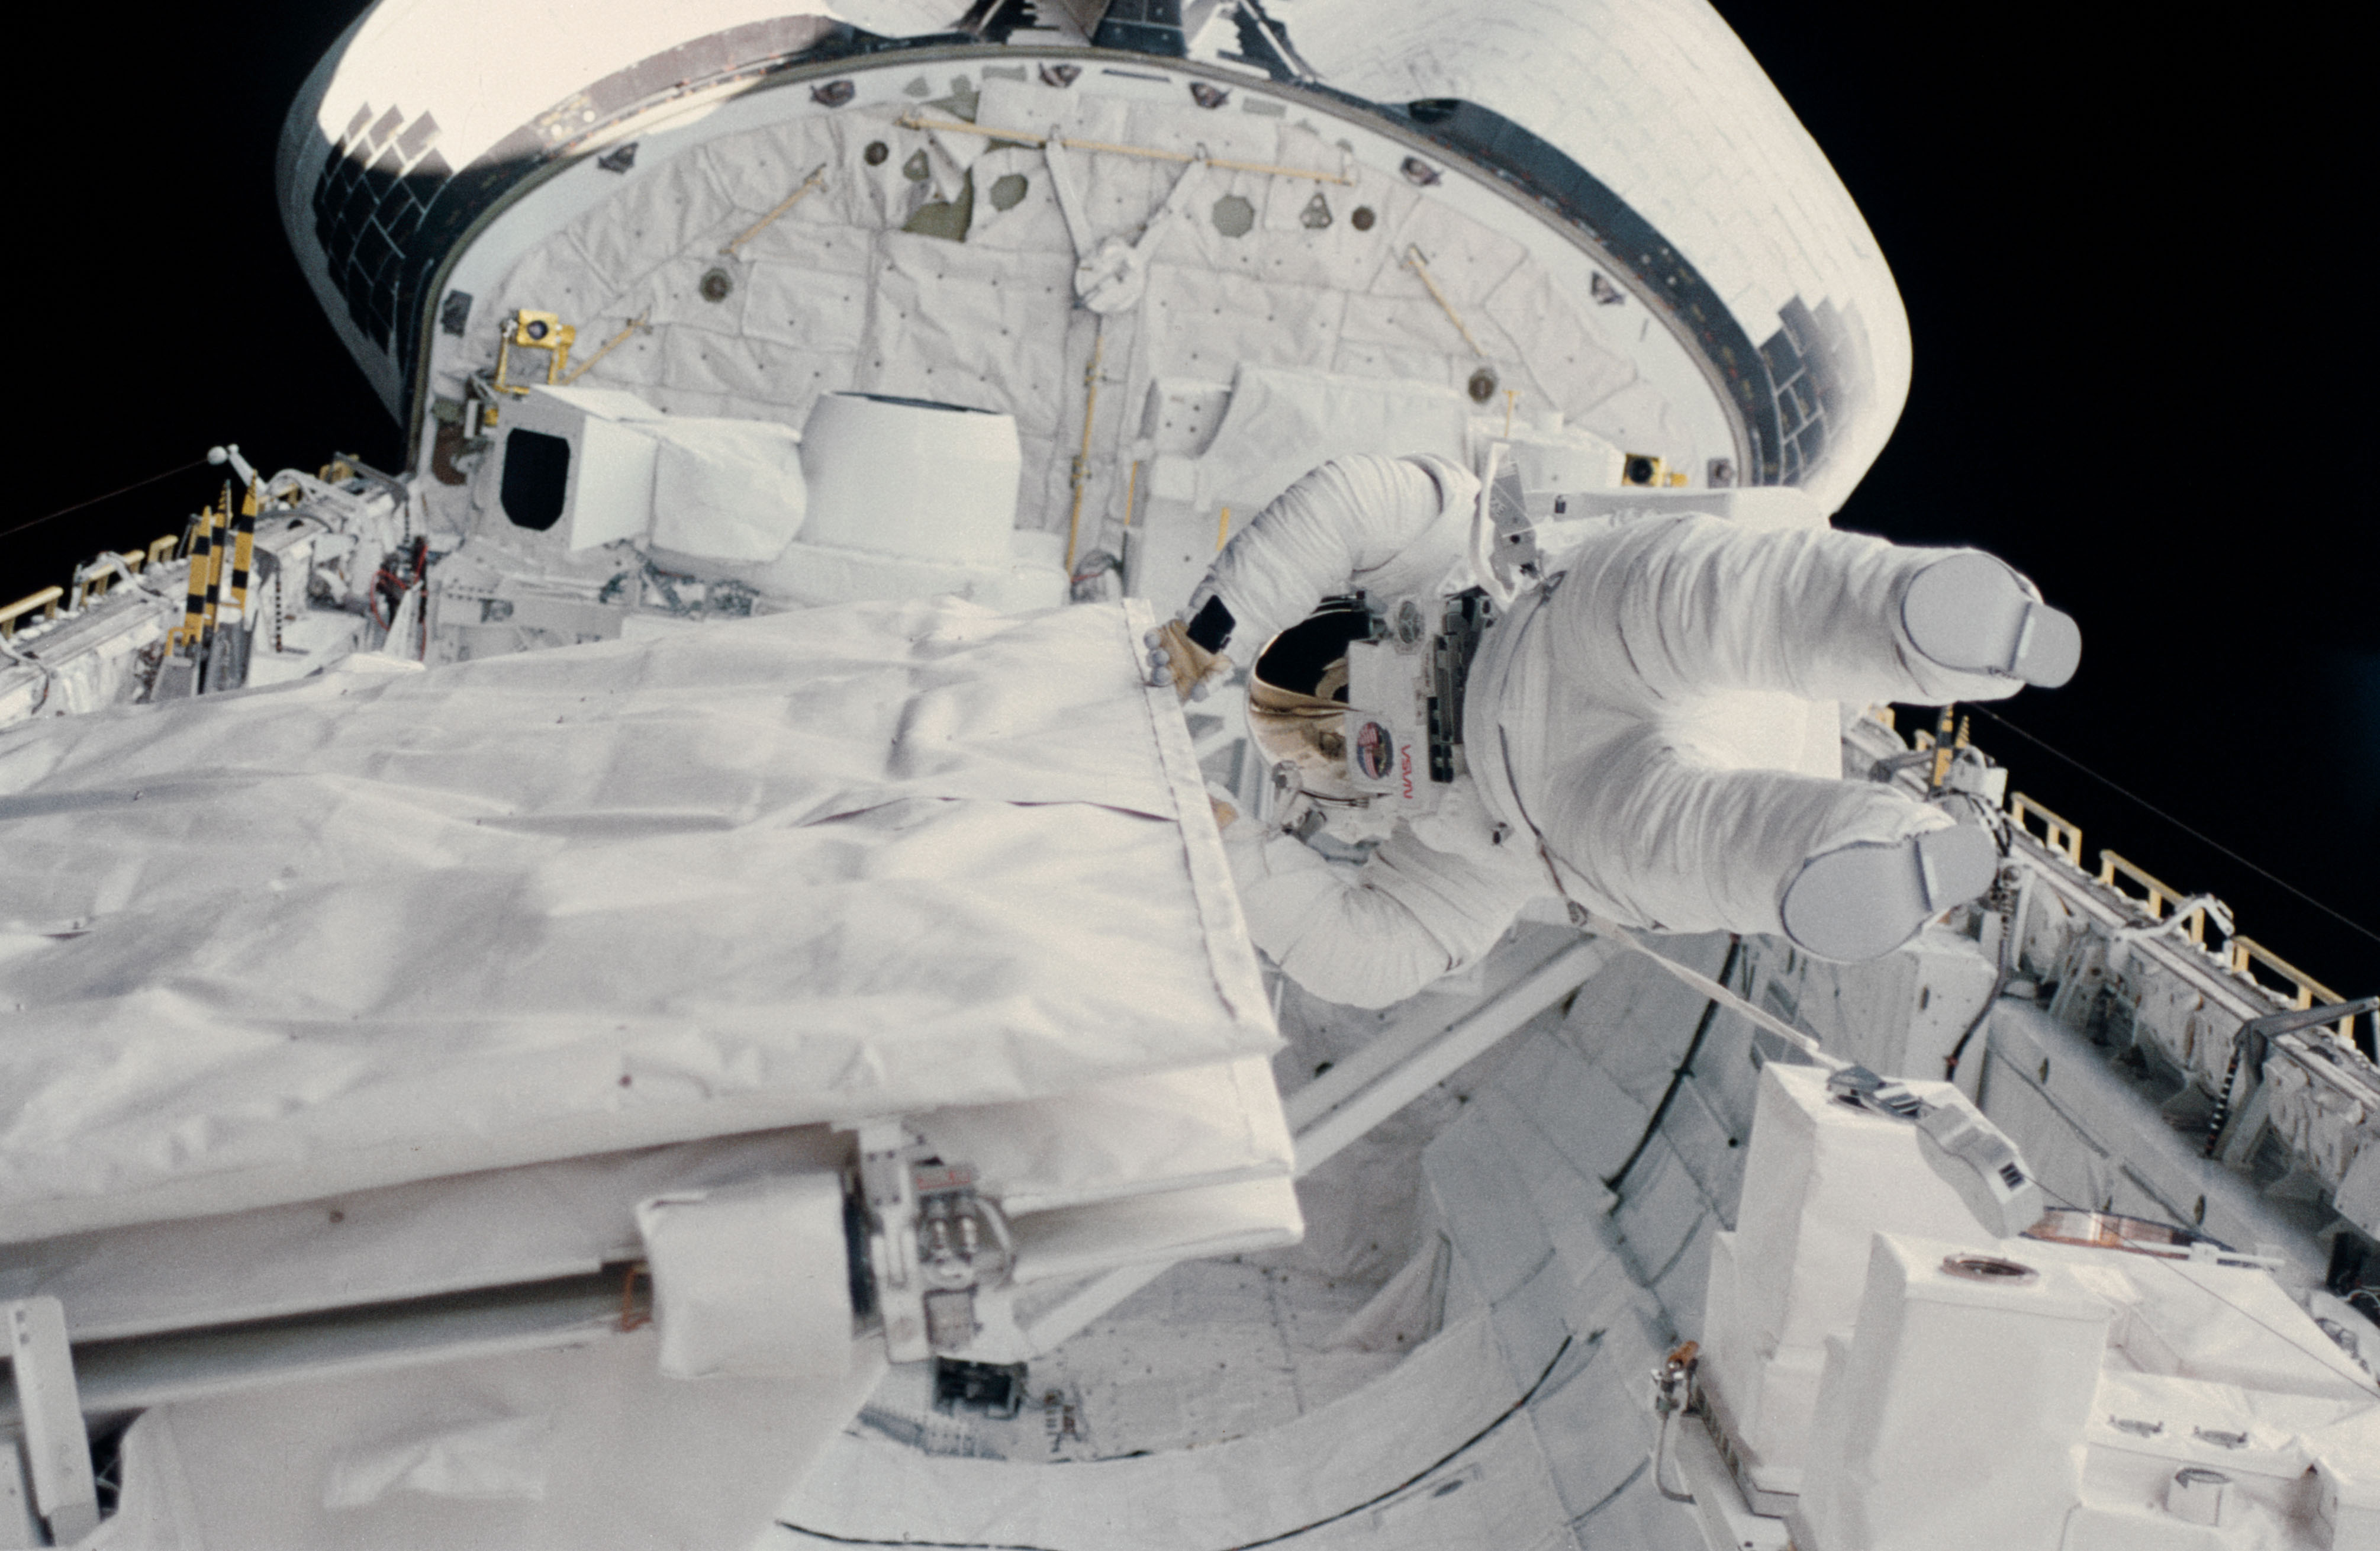 On Mission 41G, which took place 30 years ago, this week, Kathy Sullivan became the first U.S. female spacewalker. Photo Credit: NASA